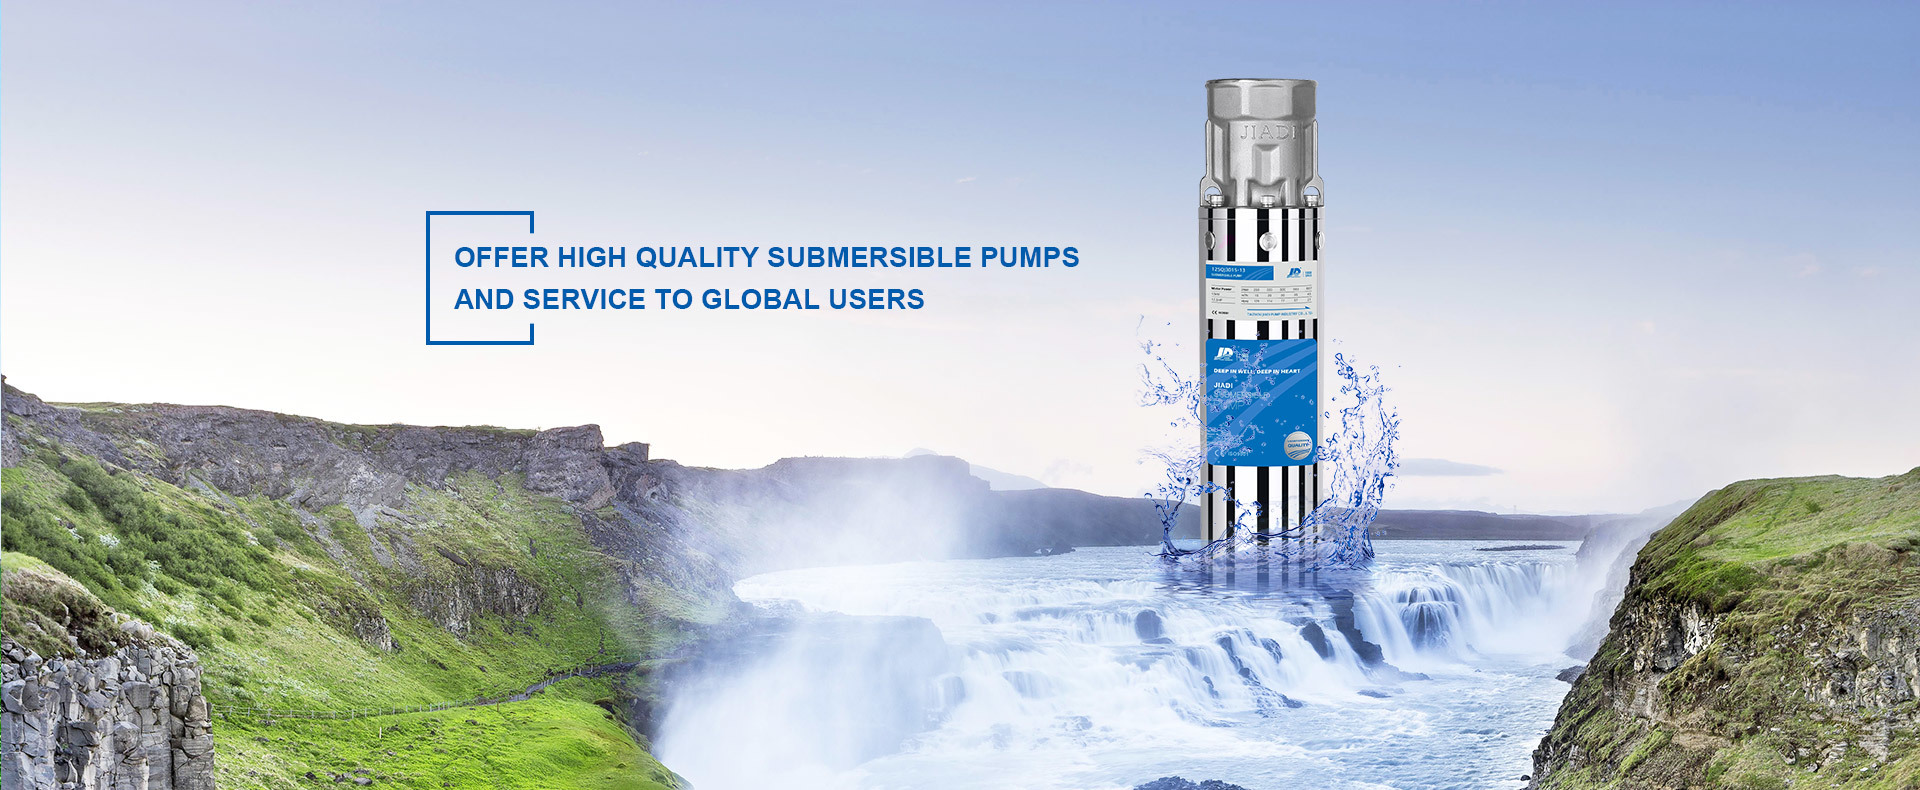 offer high quality submersible pumps